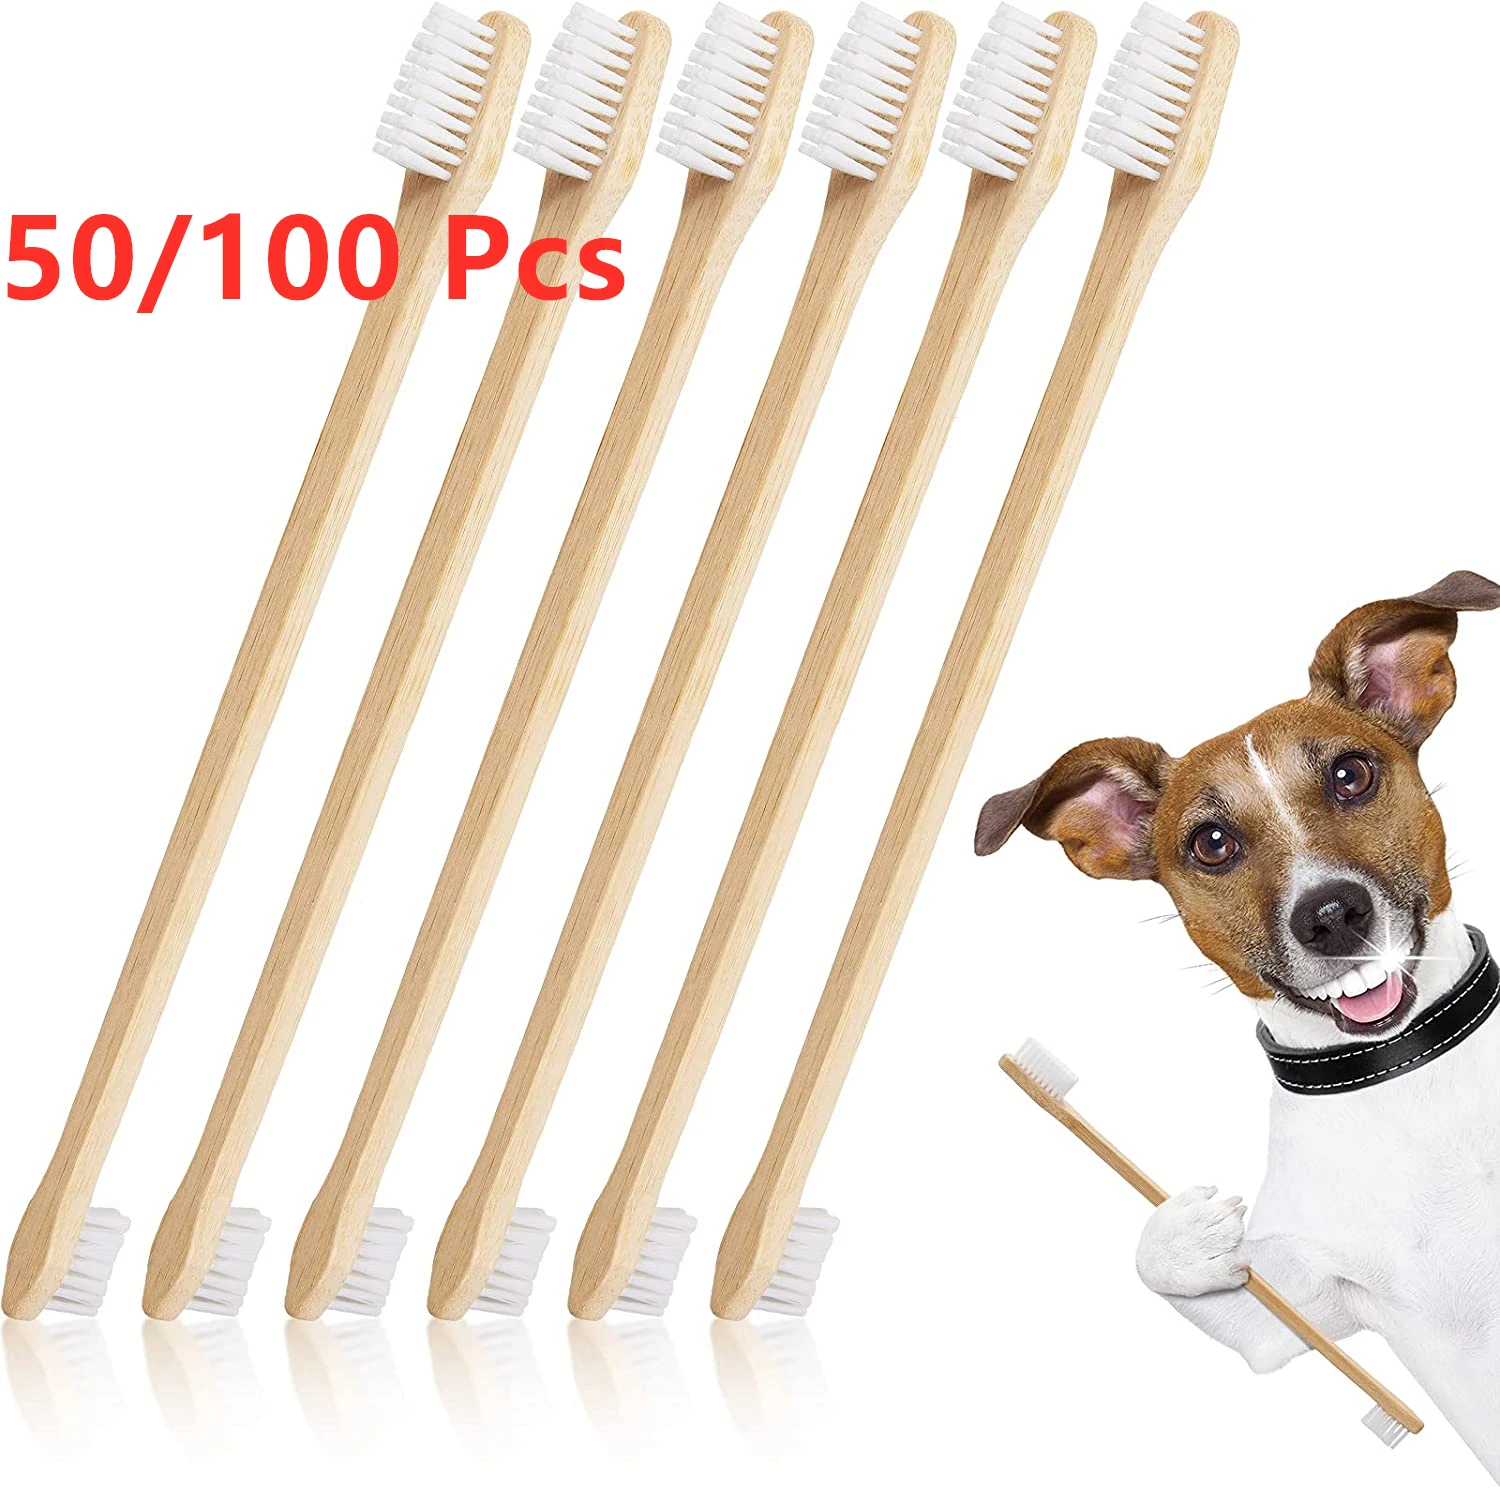 50 Pcs Pet Bamboo Toothbrush-Double-Sided Dental Hygiene Brush for Puppies,Cats-Oral Cleaning Tools with Ergonomic Long Handle